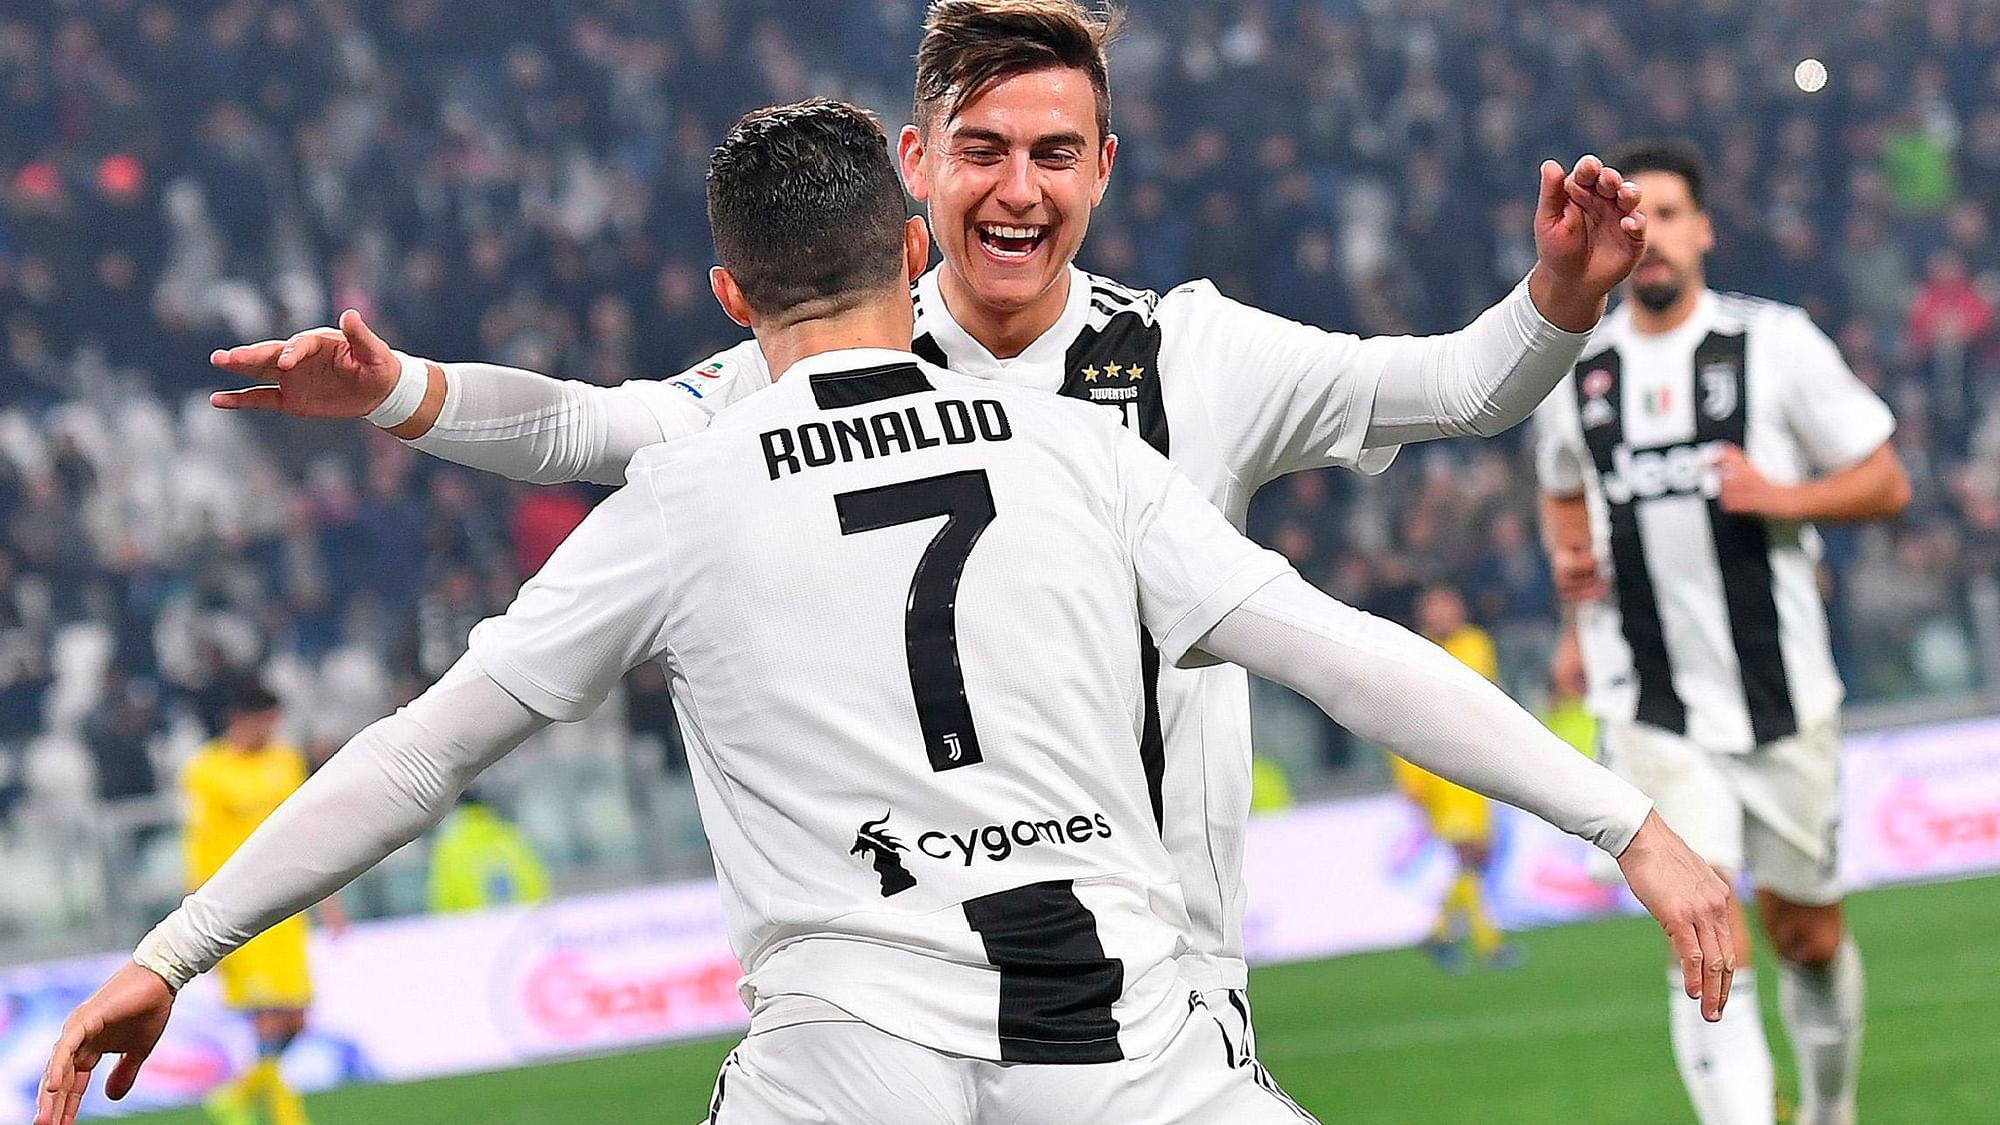 Juventus’ Cristiano Ronaldo celebrates with his teammate Paulo Dybala after scoring during the Serie A match against Frosinone at the Allianz Stadium in Turin, Italy on Friday.